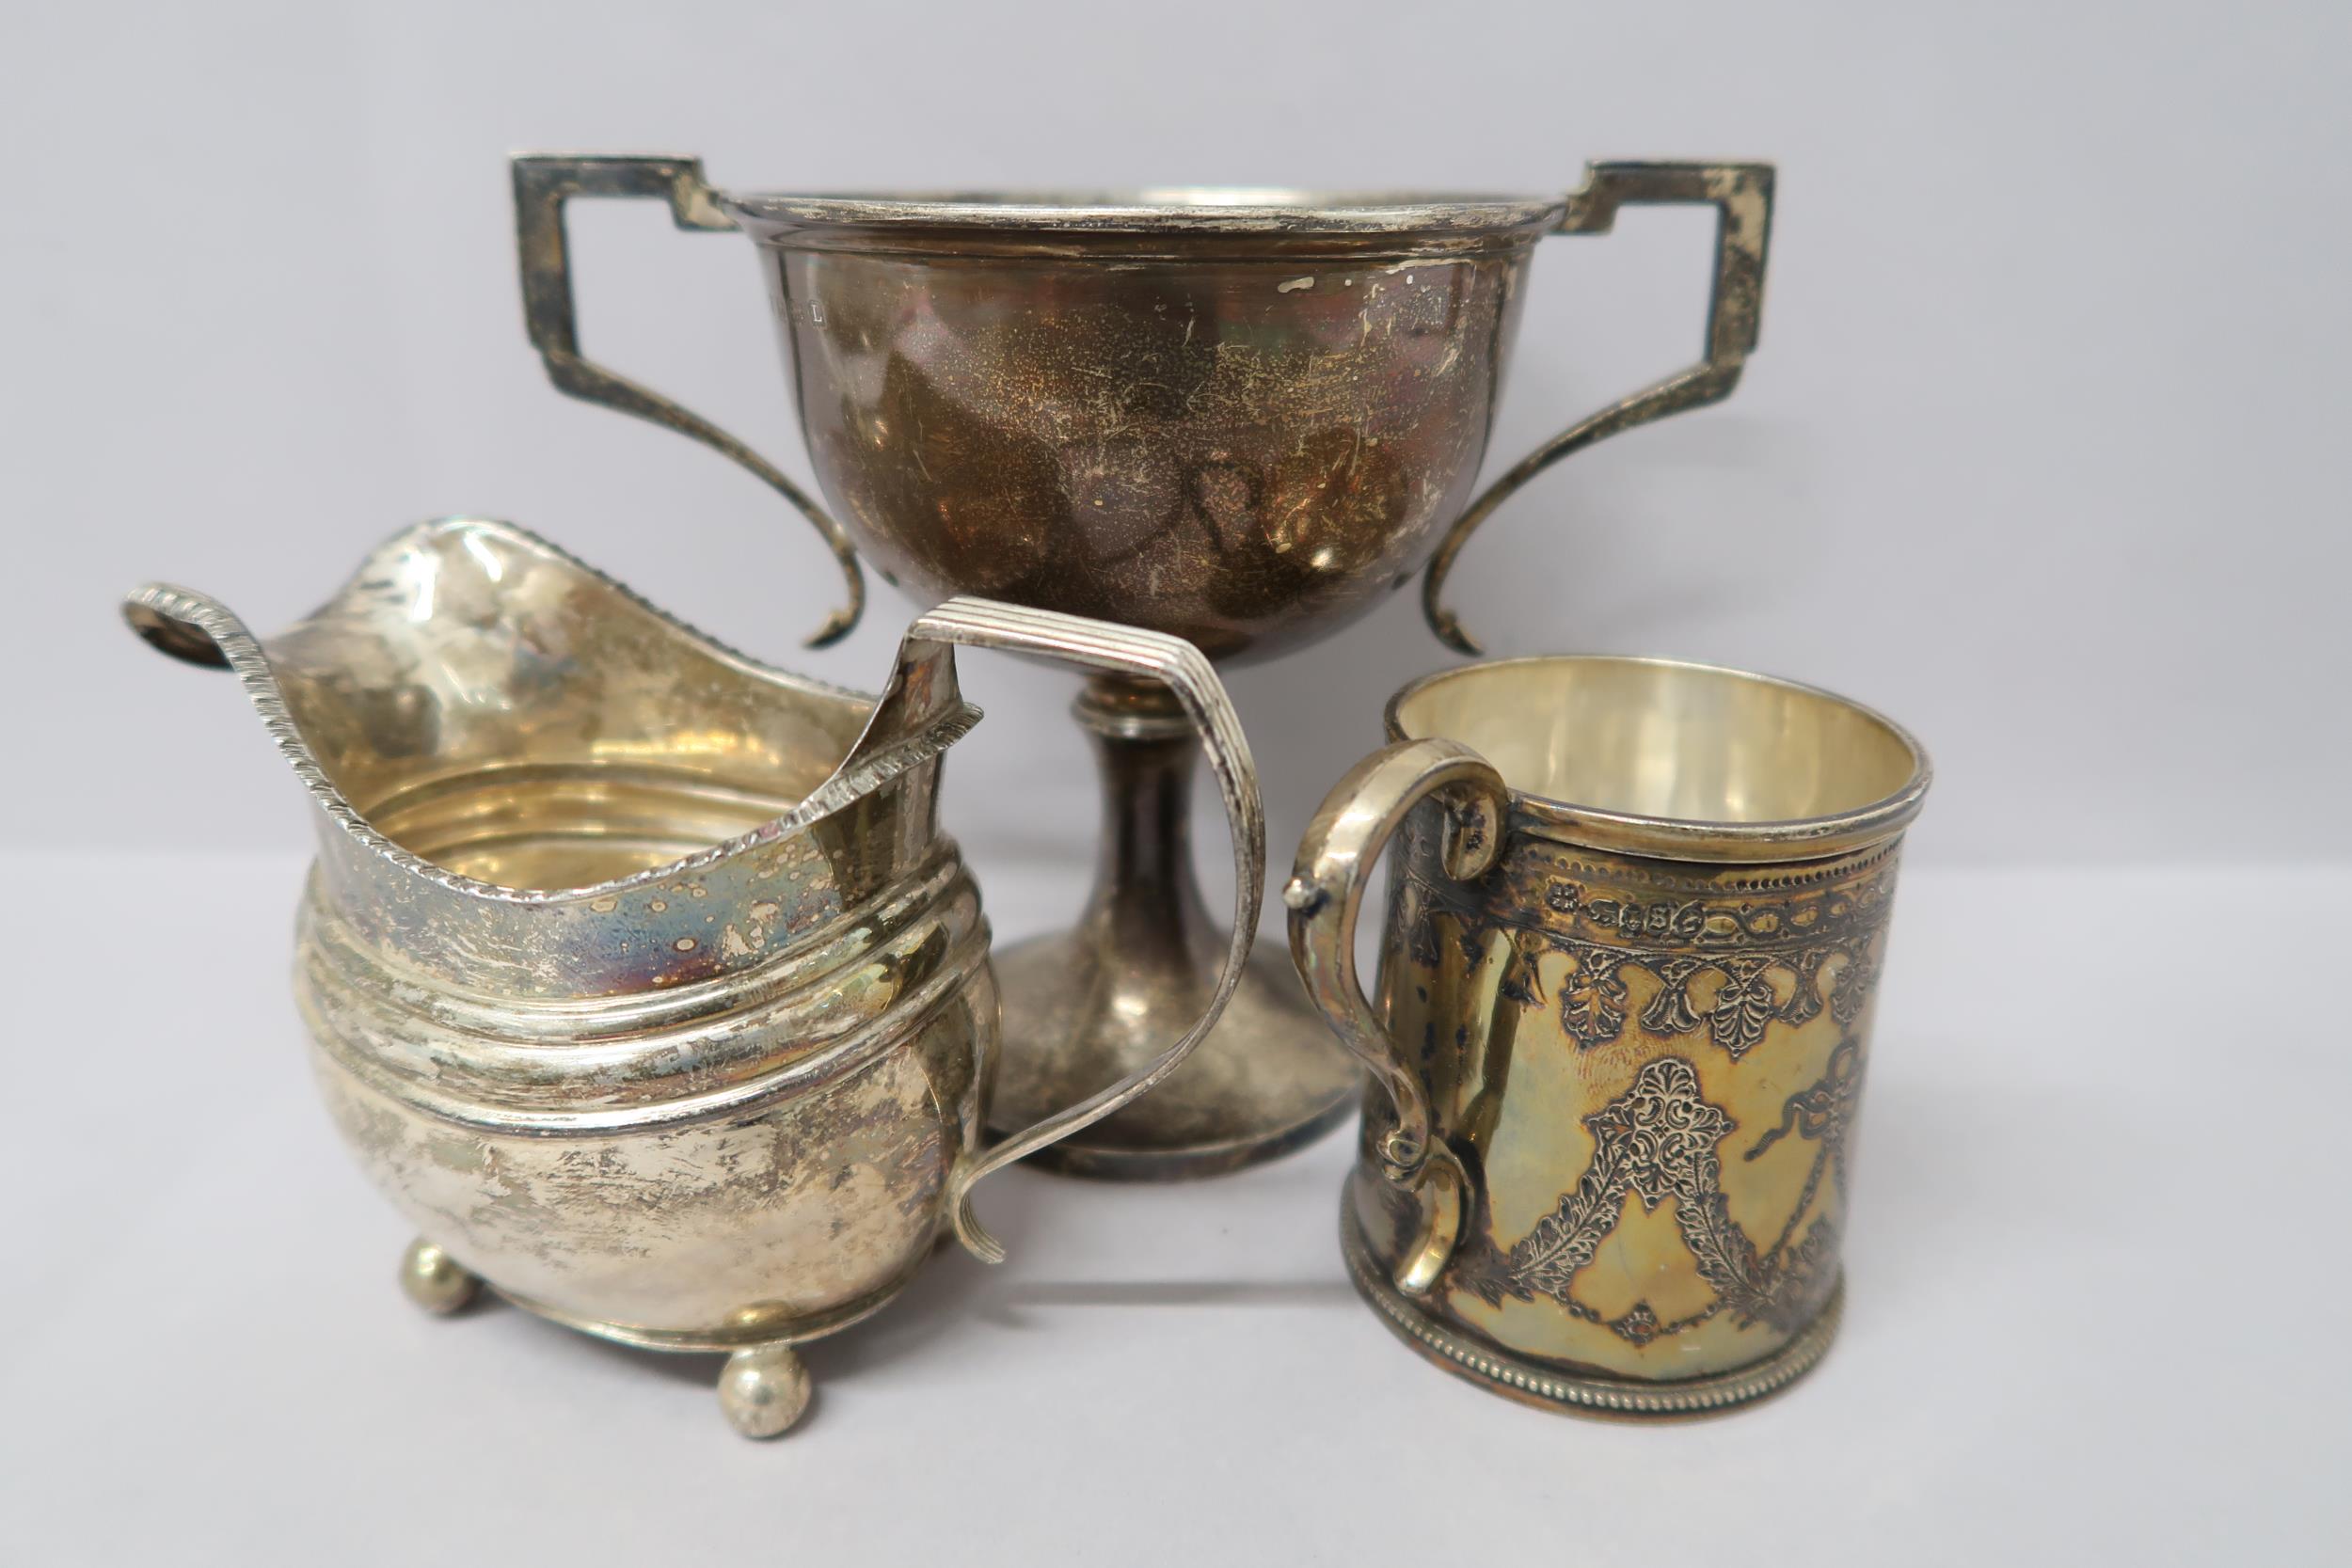 A hallmarked silver cup decorated with bows and swags, London 1873 Martin Hall & Co, and a silver